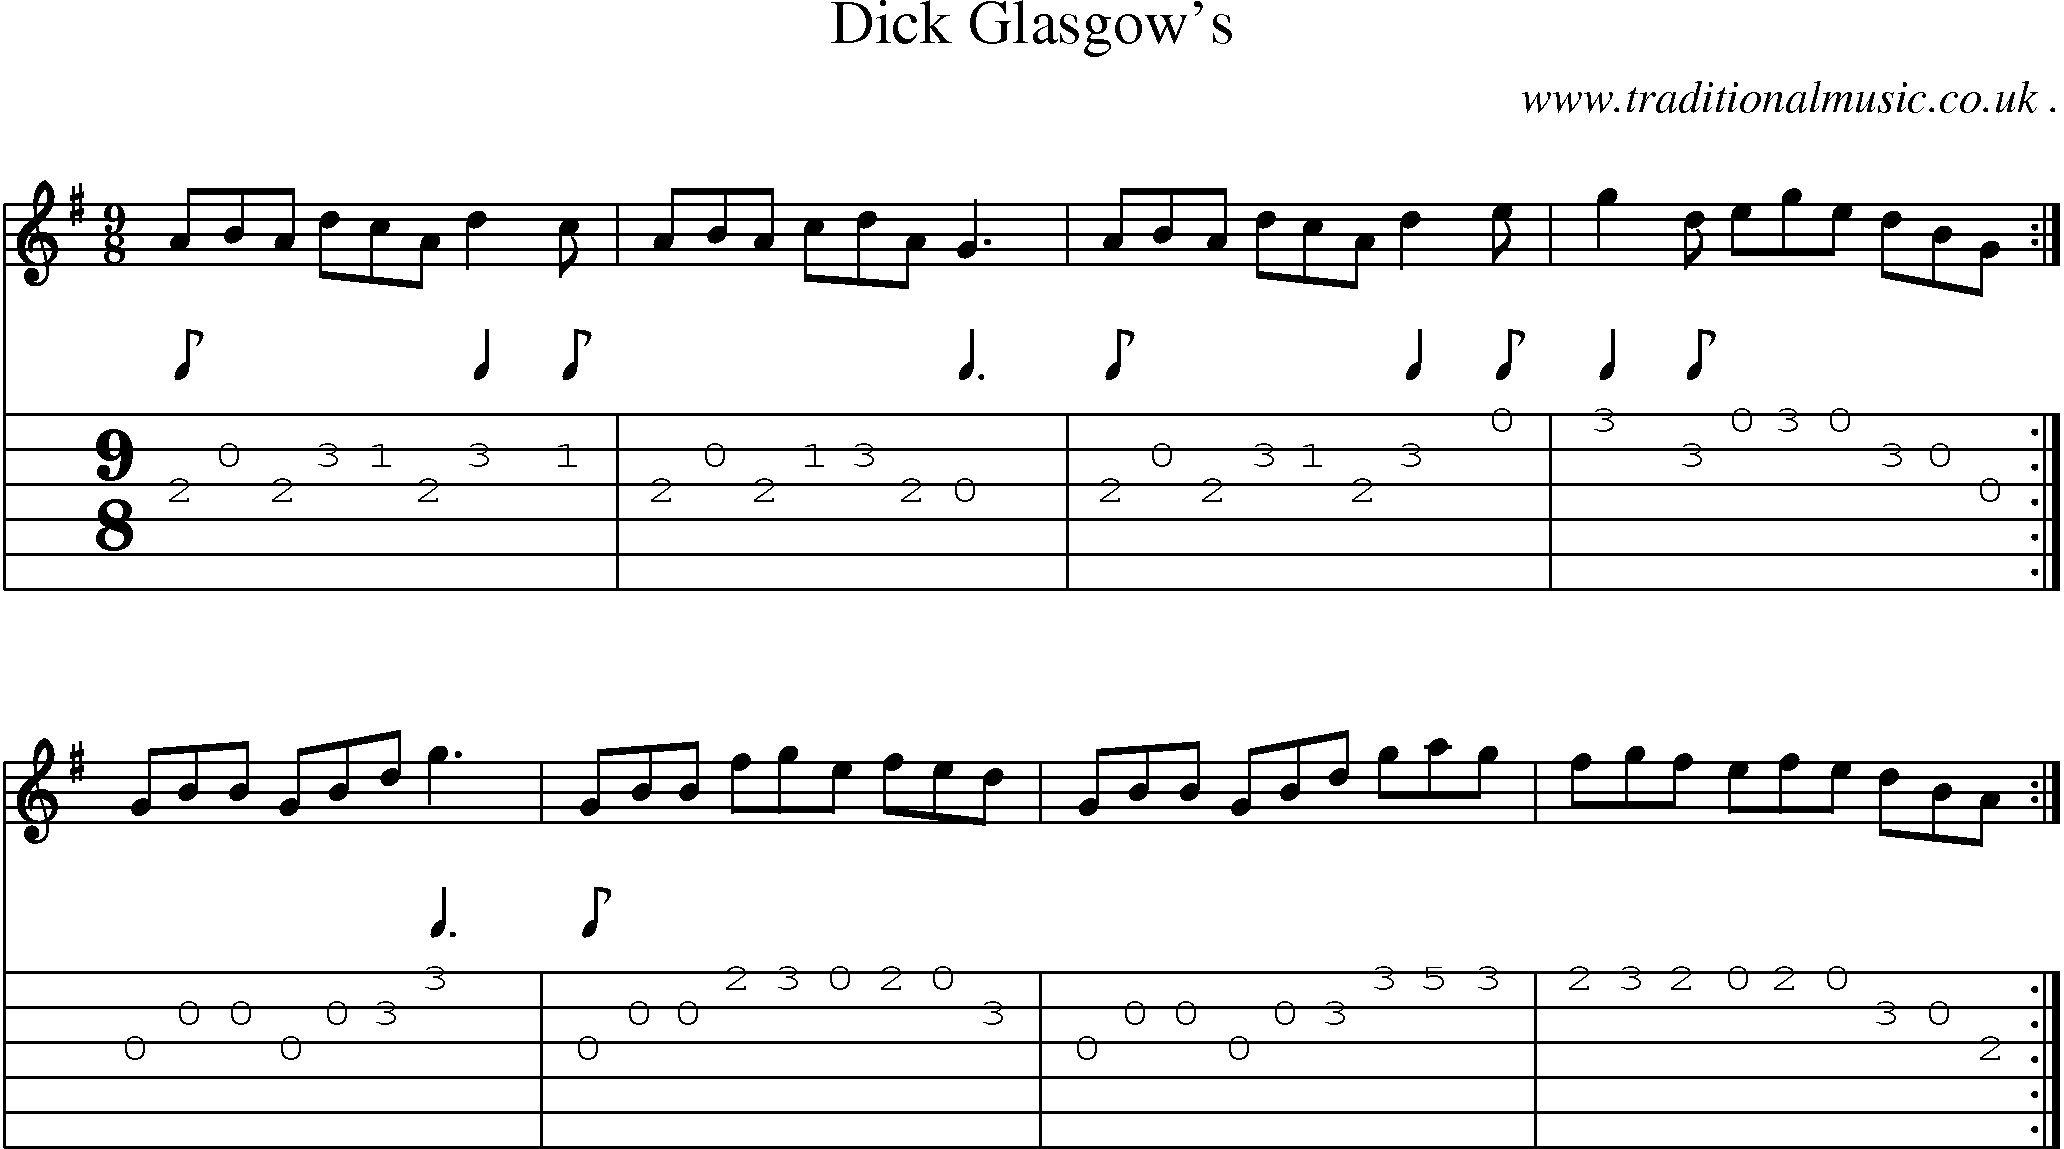 Sheet-music  score, Chords and Guitar Tabs for Dick Glasgows